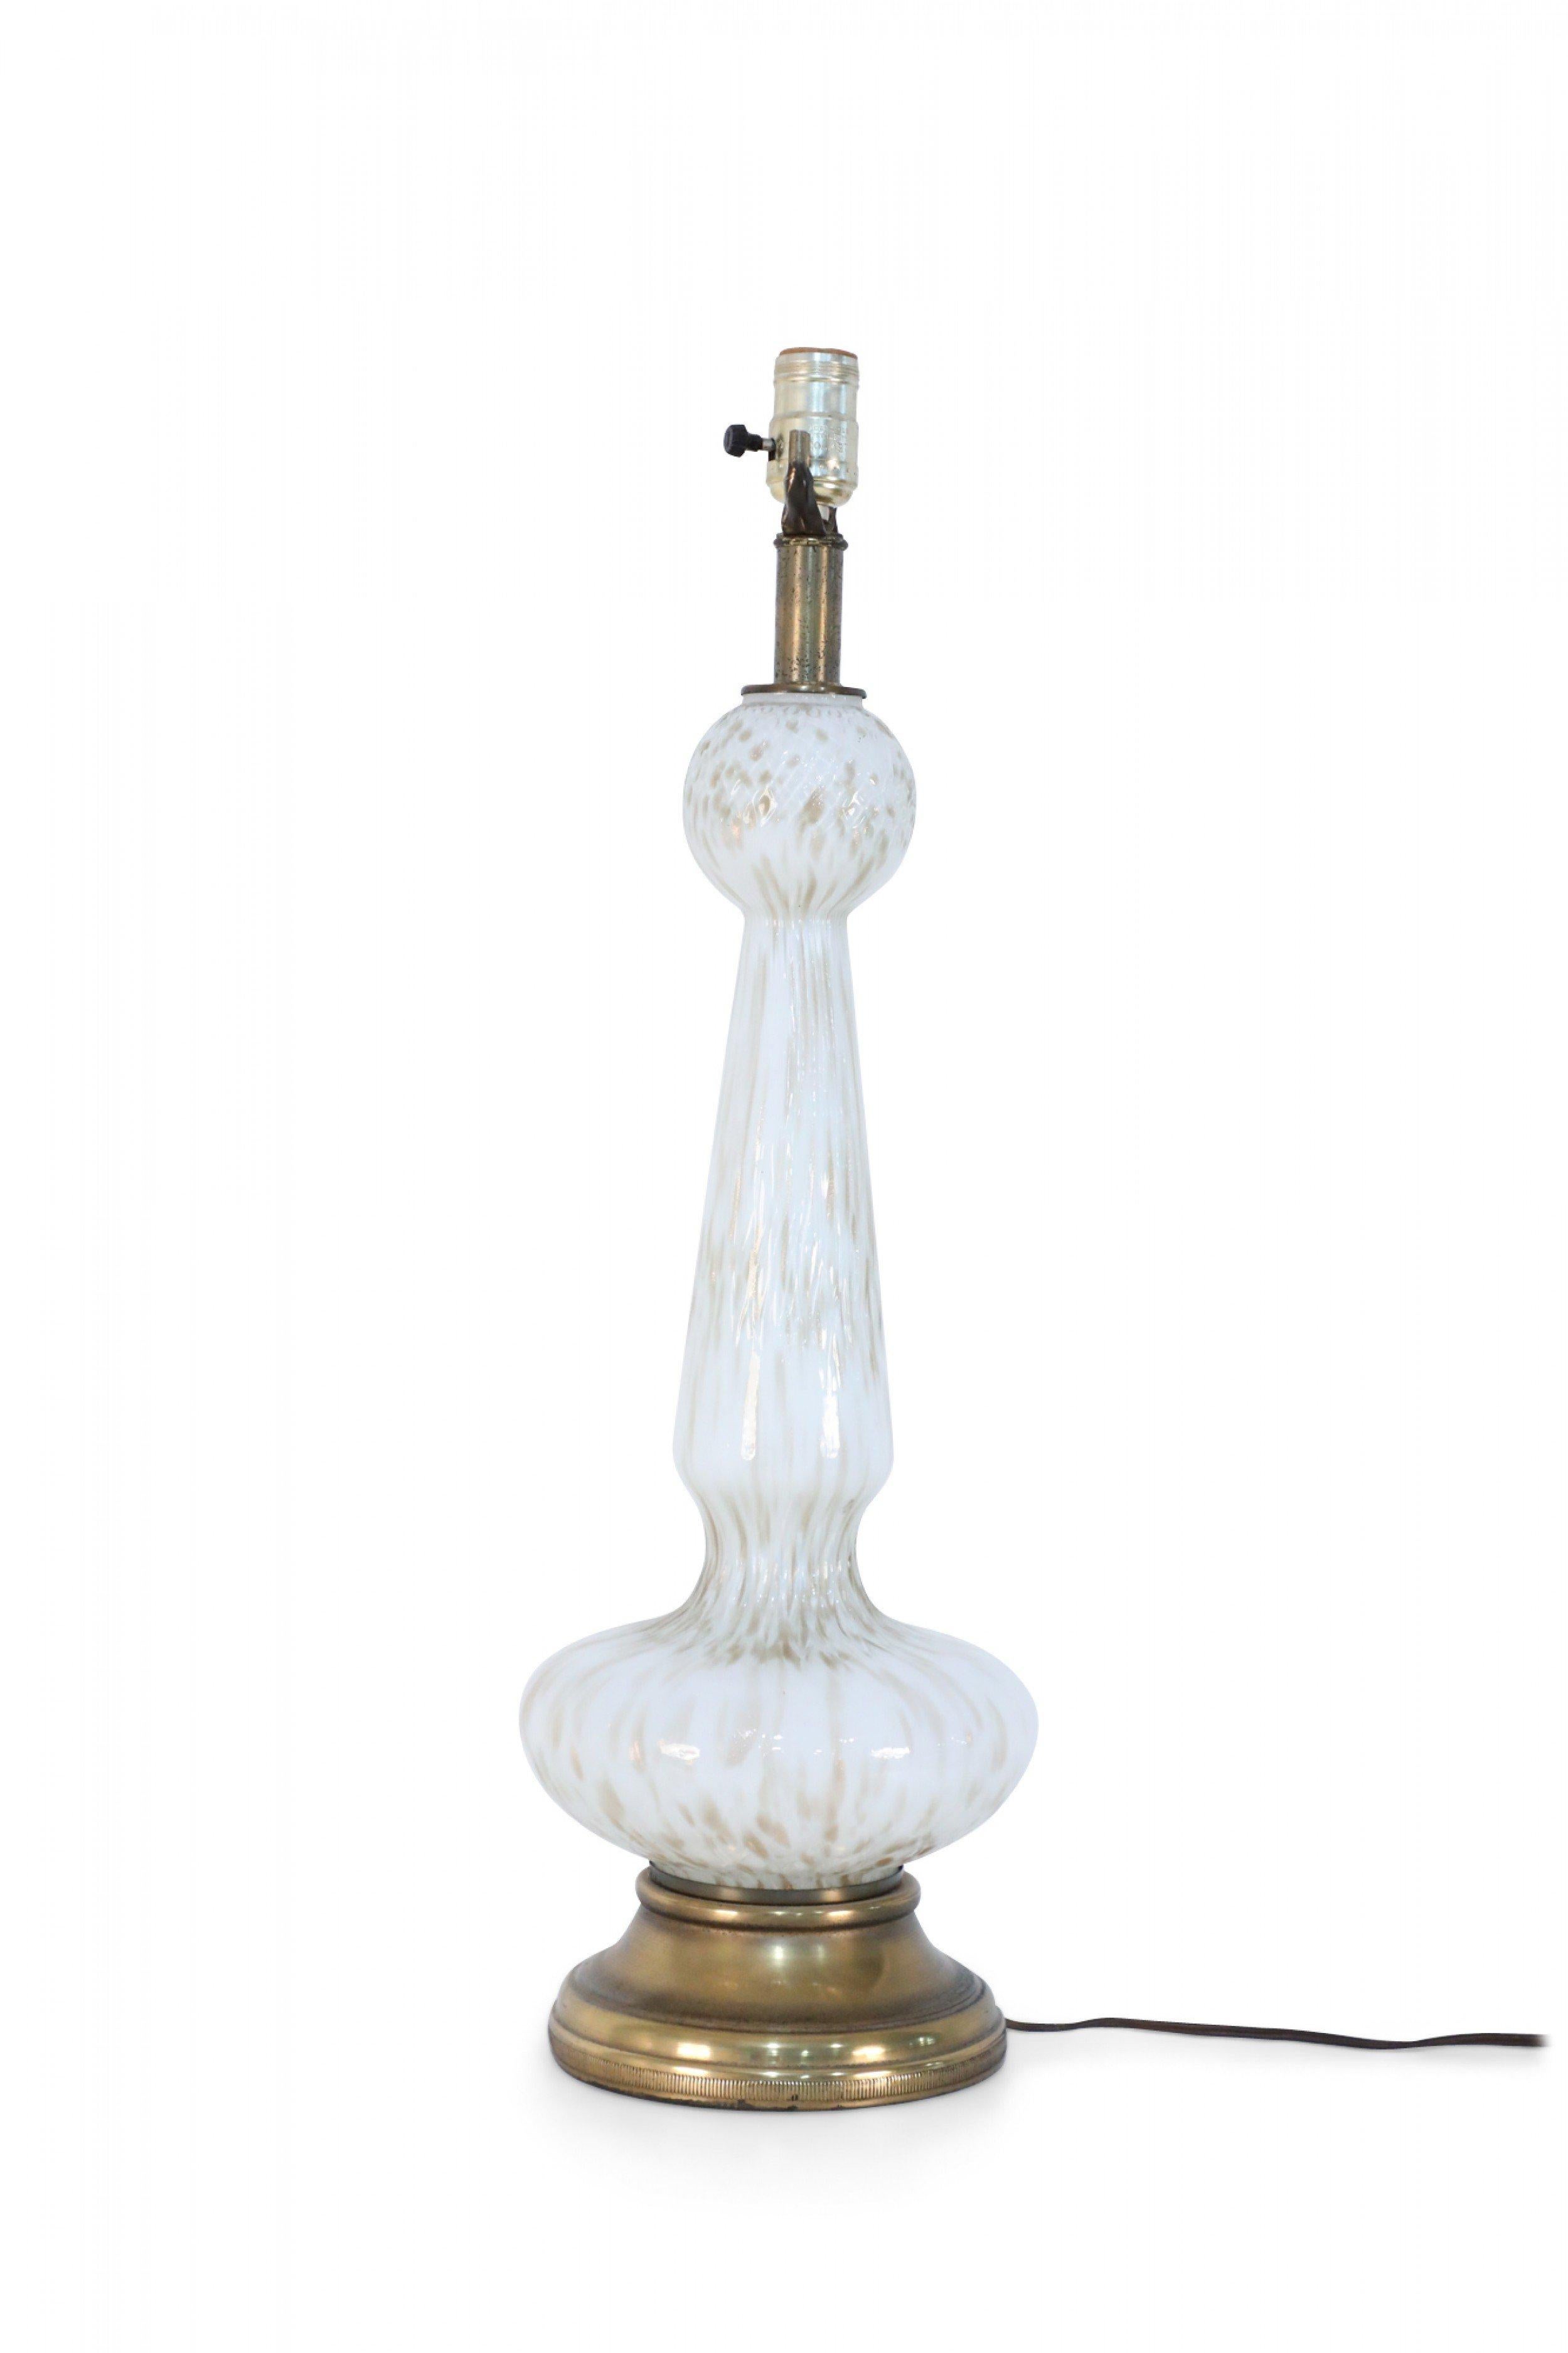 Italian Mid-Century Venetian-style white glass table lamp with gold dust streaks throughout on a circular brass base with brass fixtures.
    